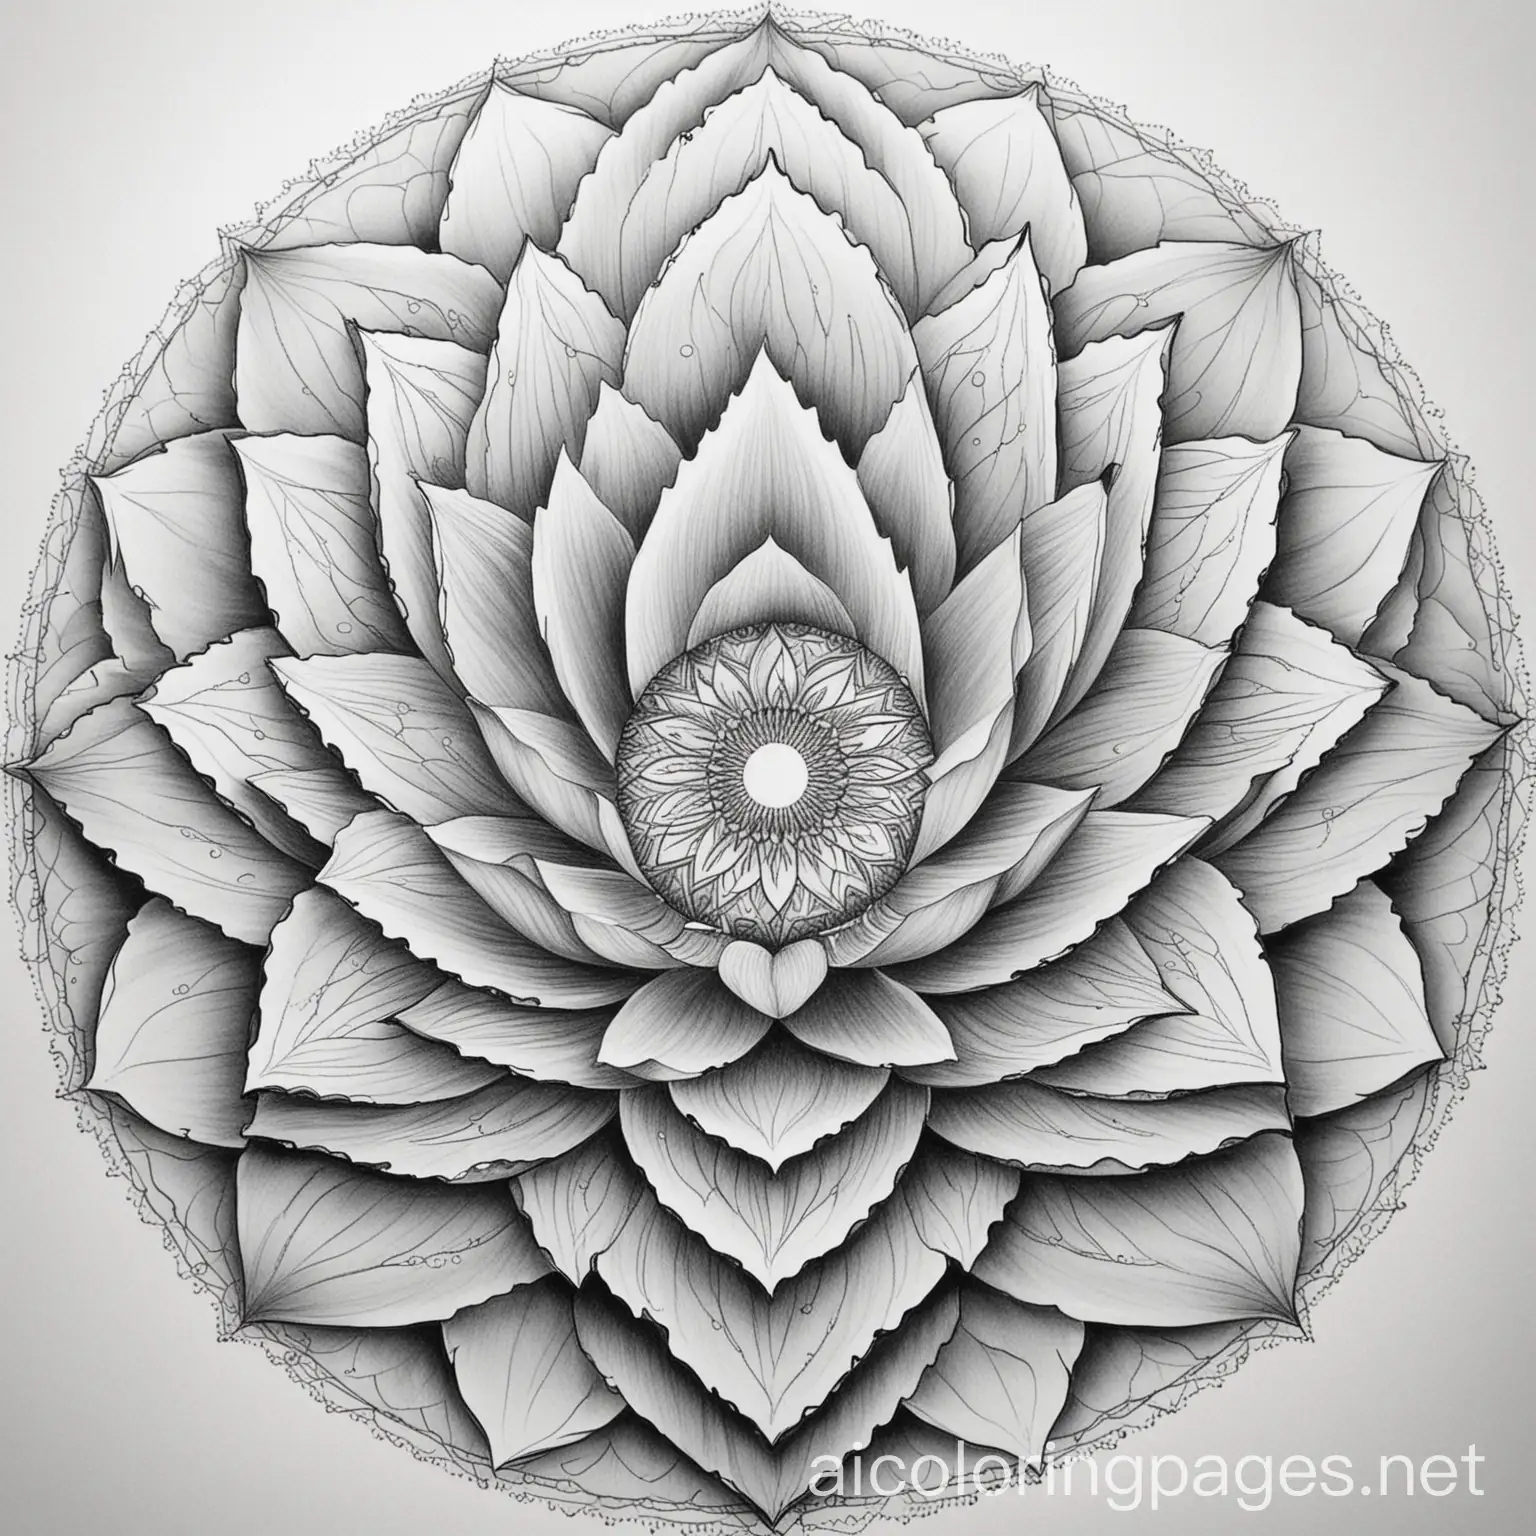 3rd eye symbol lotus petal chakra mandala art White and greyscale, Coloring Page, black and white, line art, white background, Simplicity, Ample White Space. The background of the coloring page is plain white to make it easy for young children to color within the lines. The outlines of all the subjects are easy to distinguish, making it simple for kids to color without too much difficulty